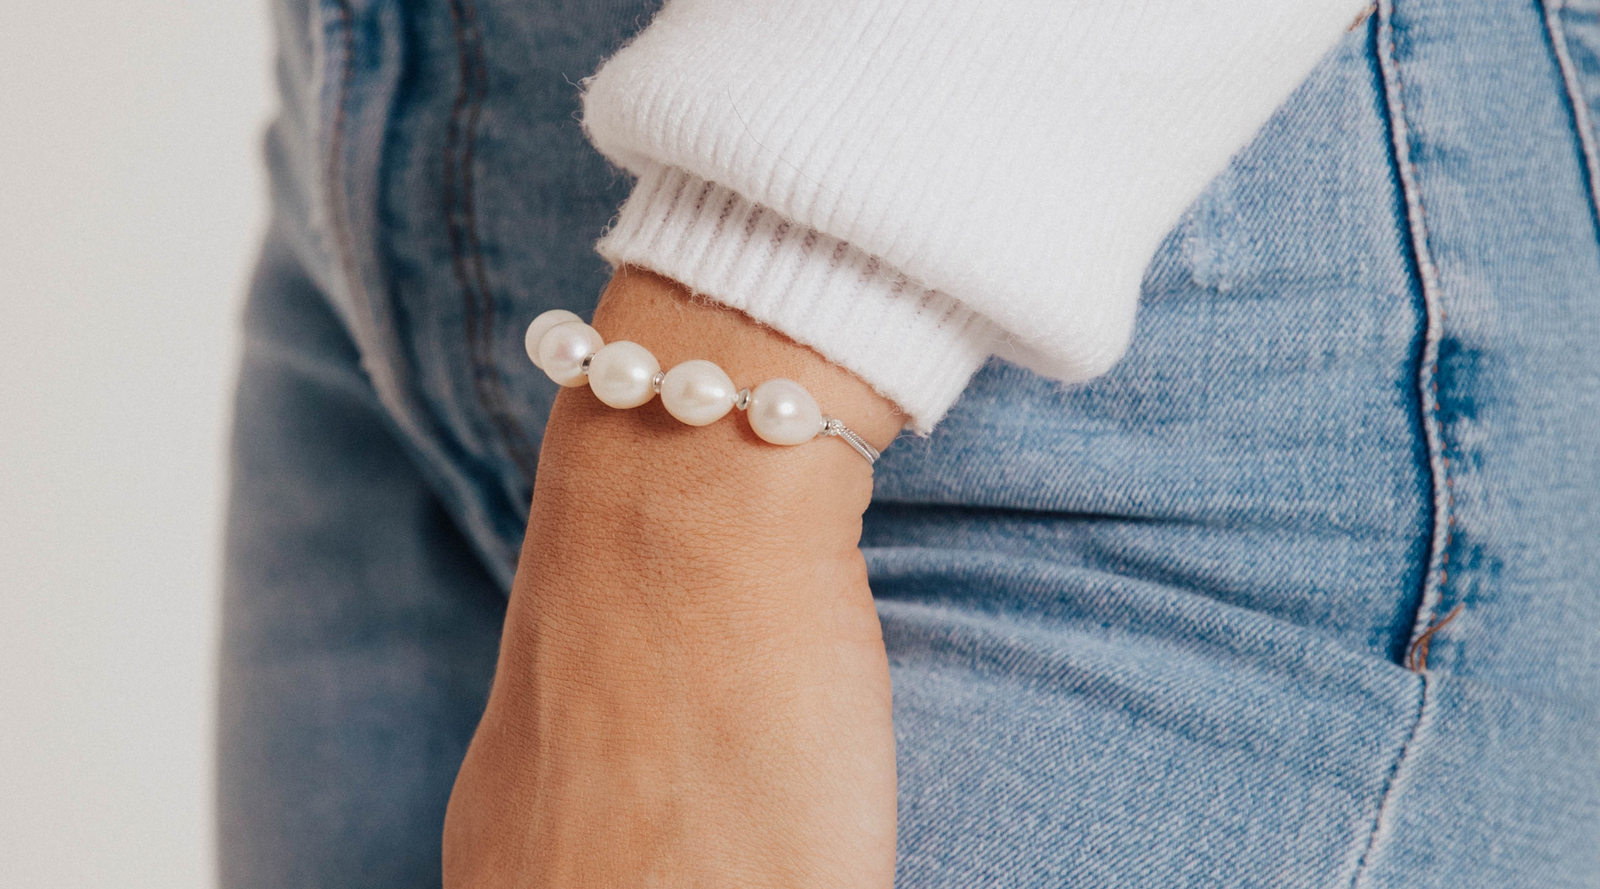 5 Common Bracelet-Buying Mistakes and How to Avoid Them